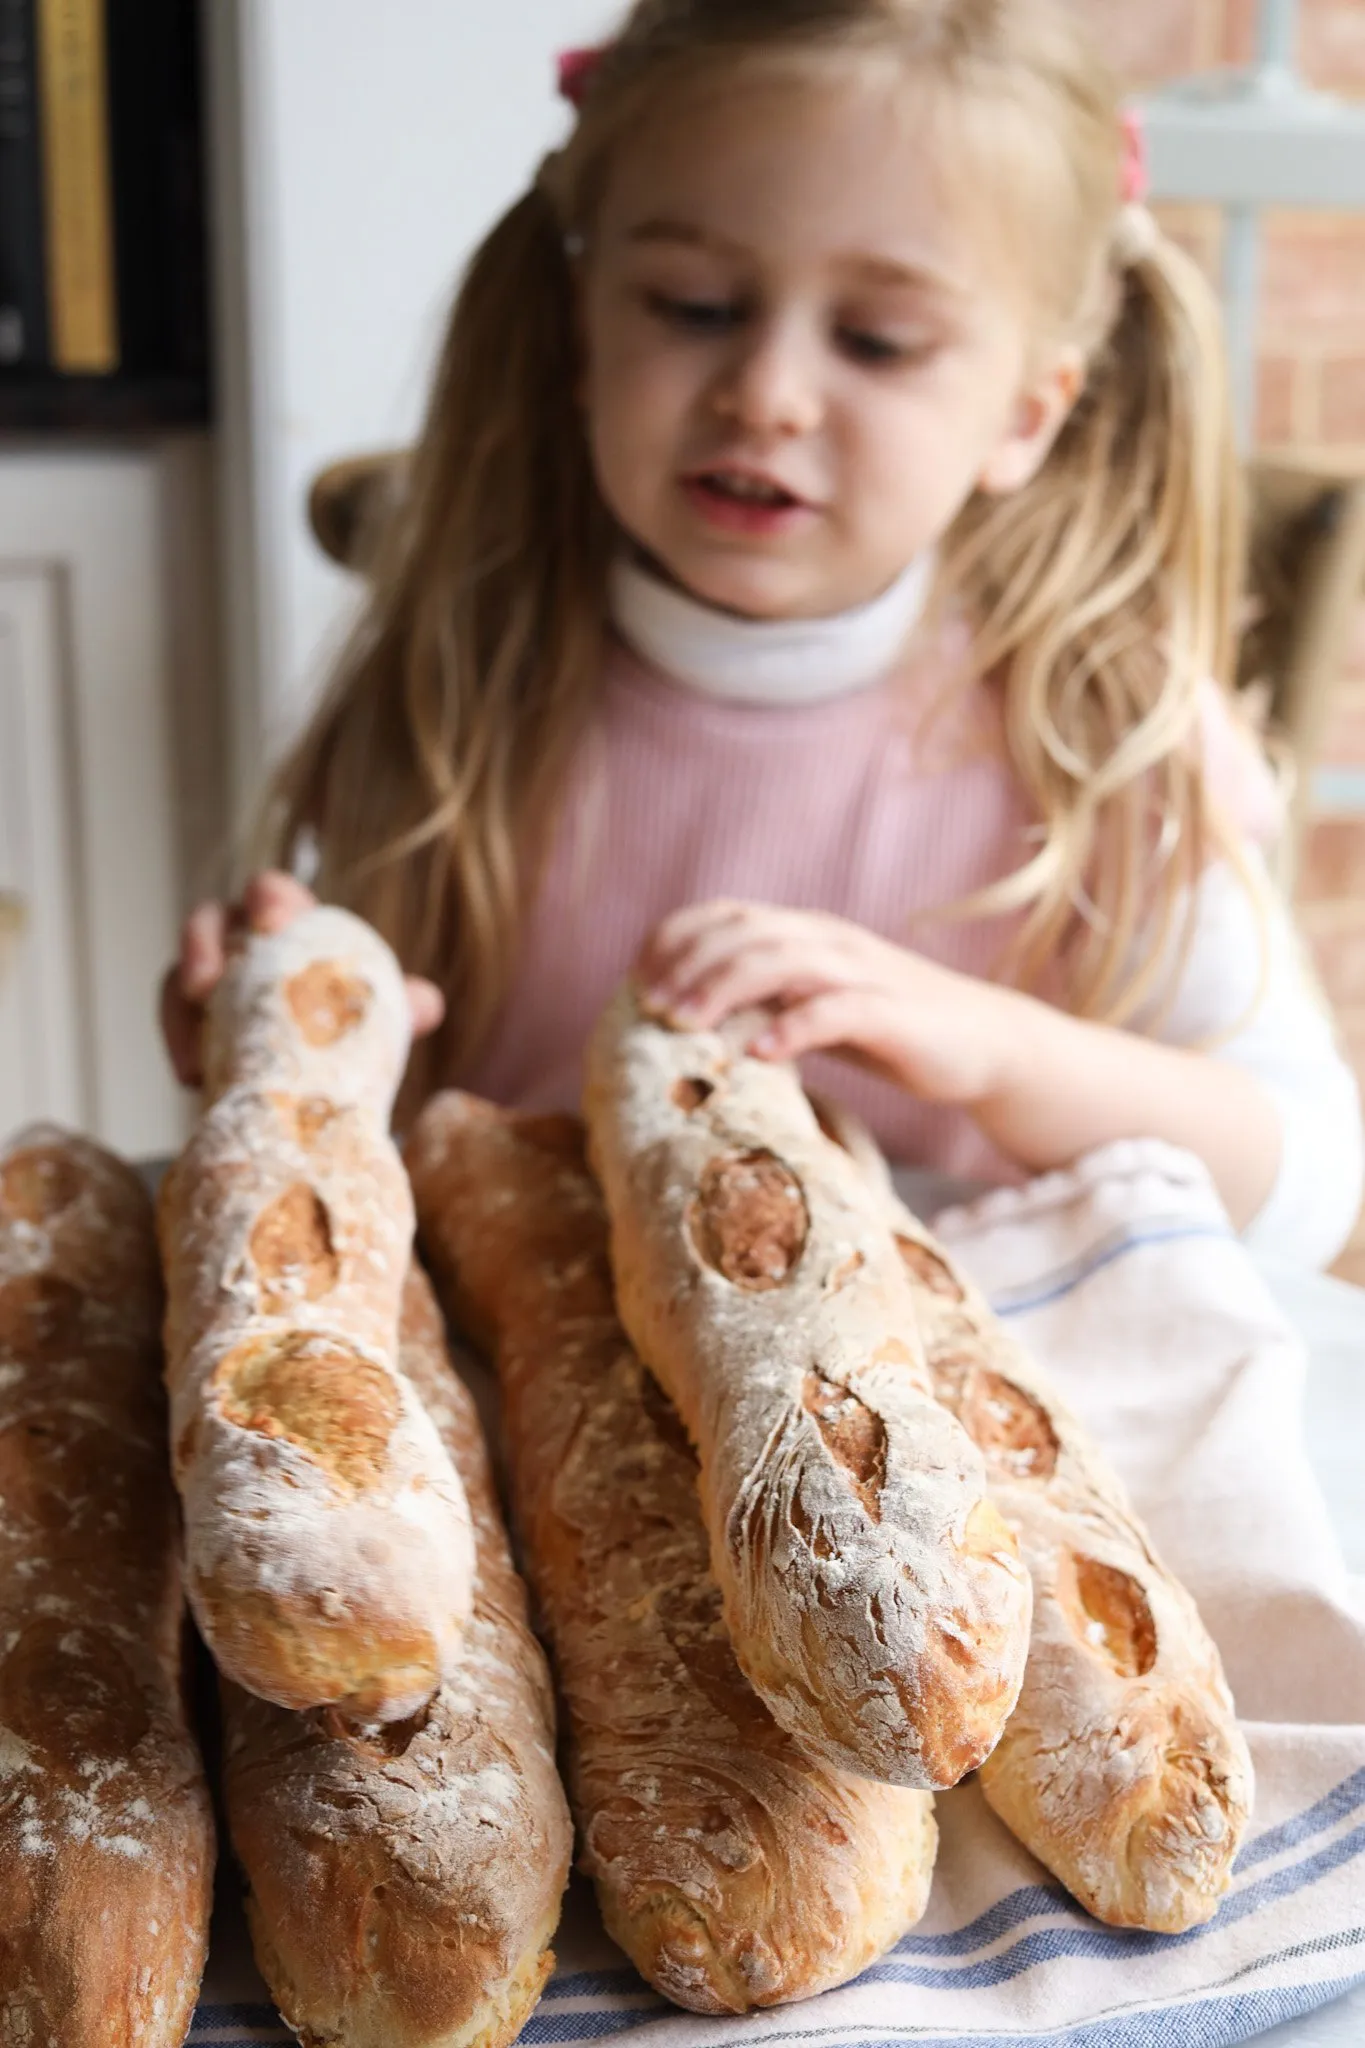 the author's daughter counting French Baguettes